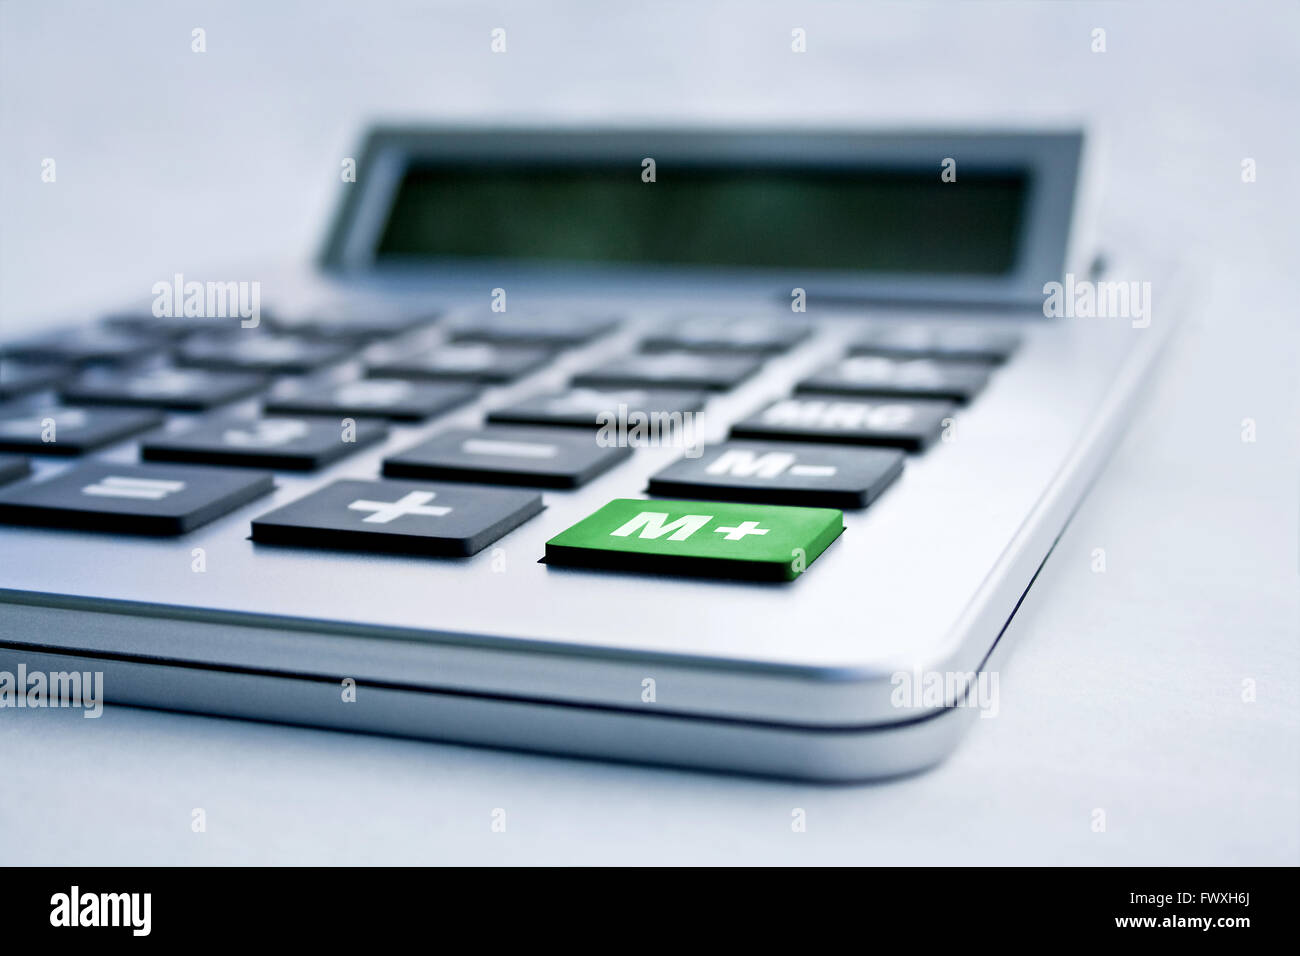 Calculator close up with a green M+ button Stock Photo - Alamy